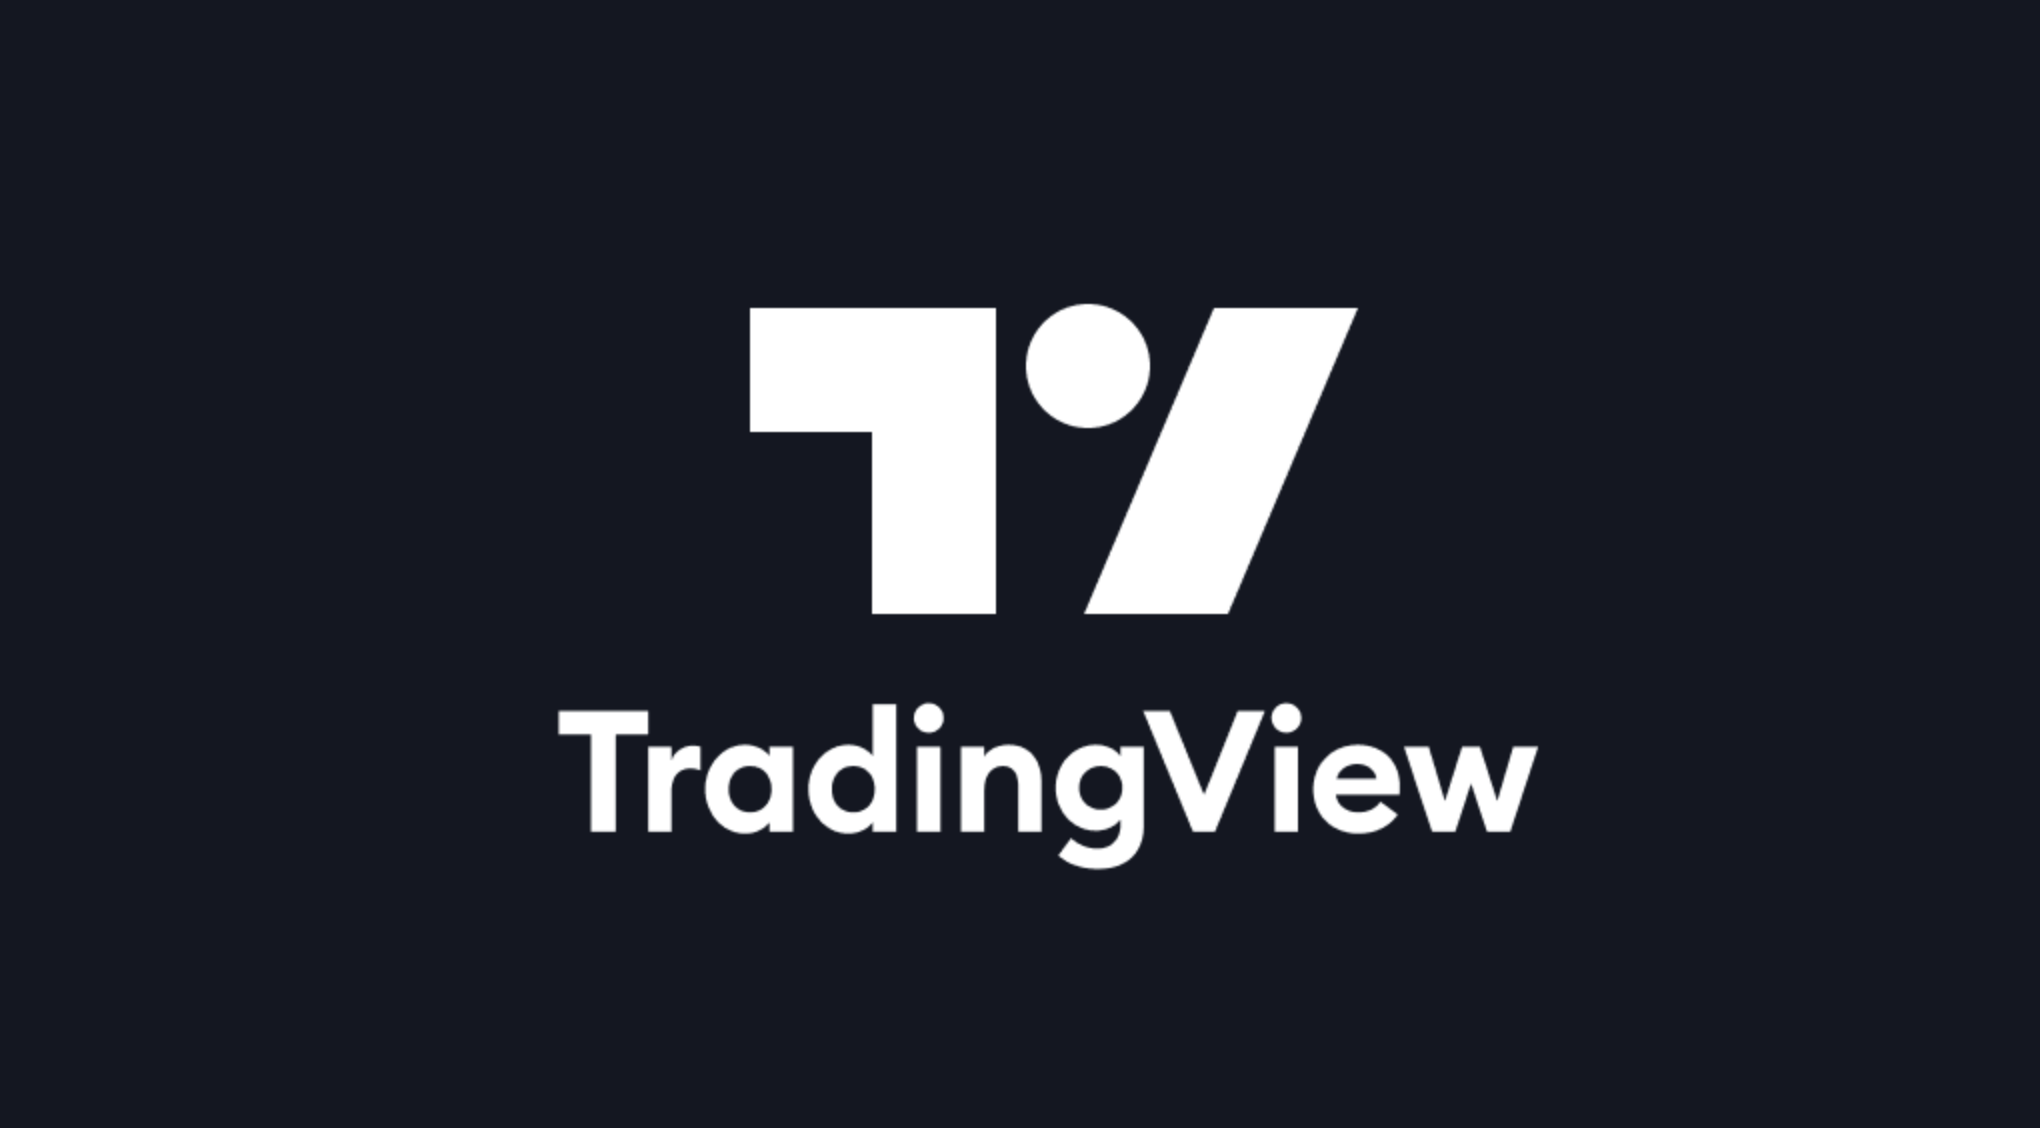 How To Use TradingView: Easy Guide For Beginners & Experts